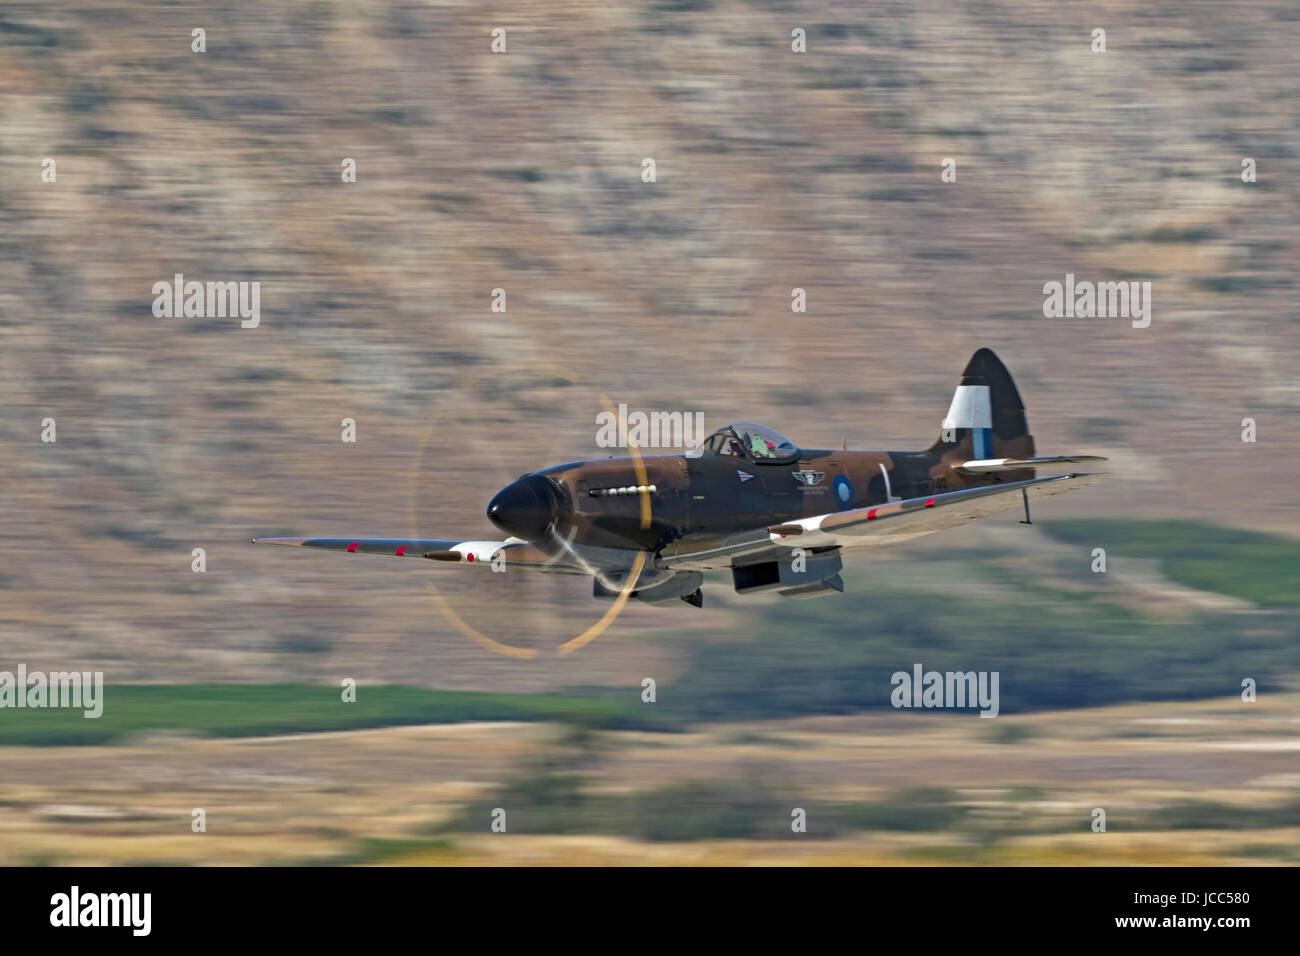 Airplane British WWII RAF Submarine Spitfire flying at air show in California Stock Photo